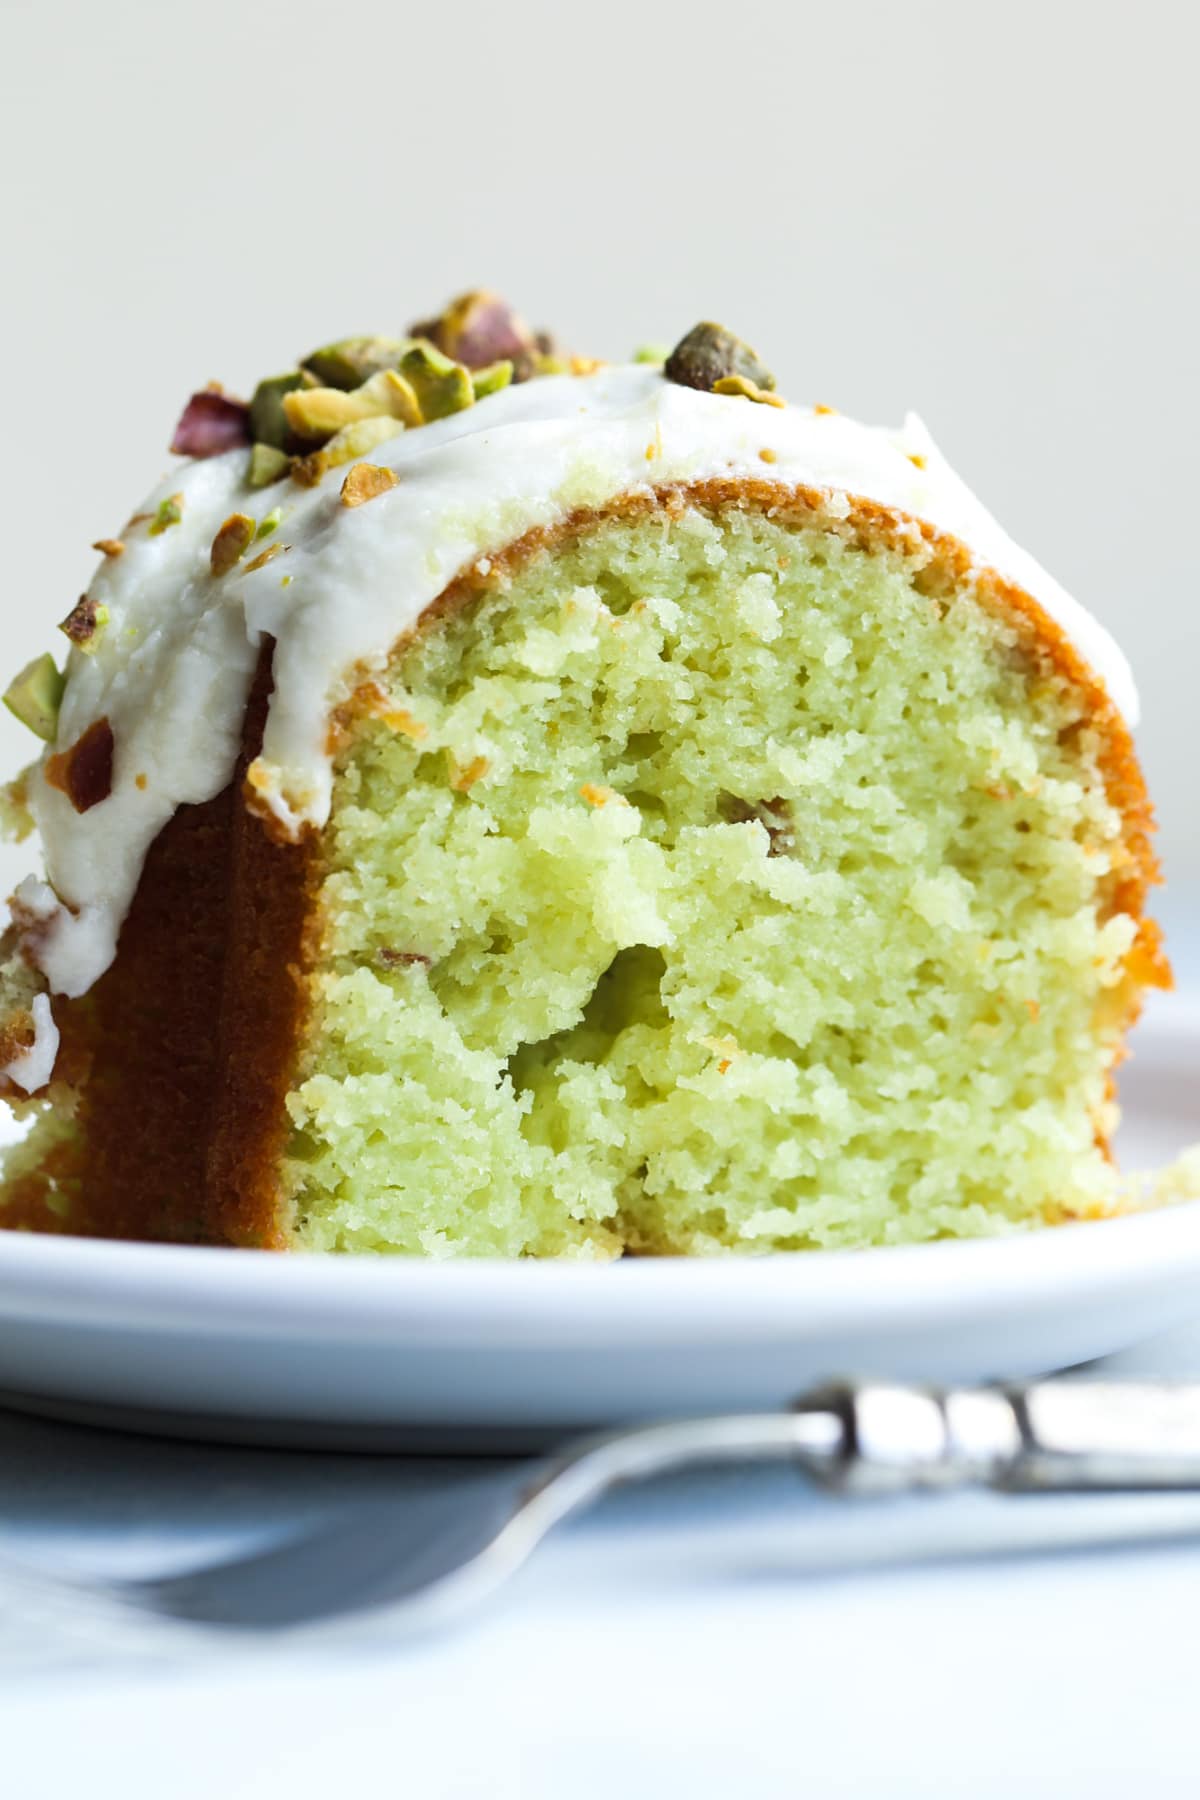 A slice of green pistachio cake on a white plate